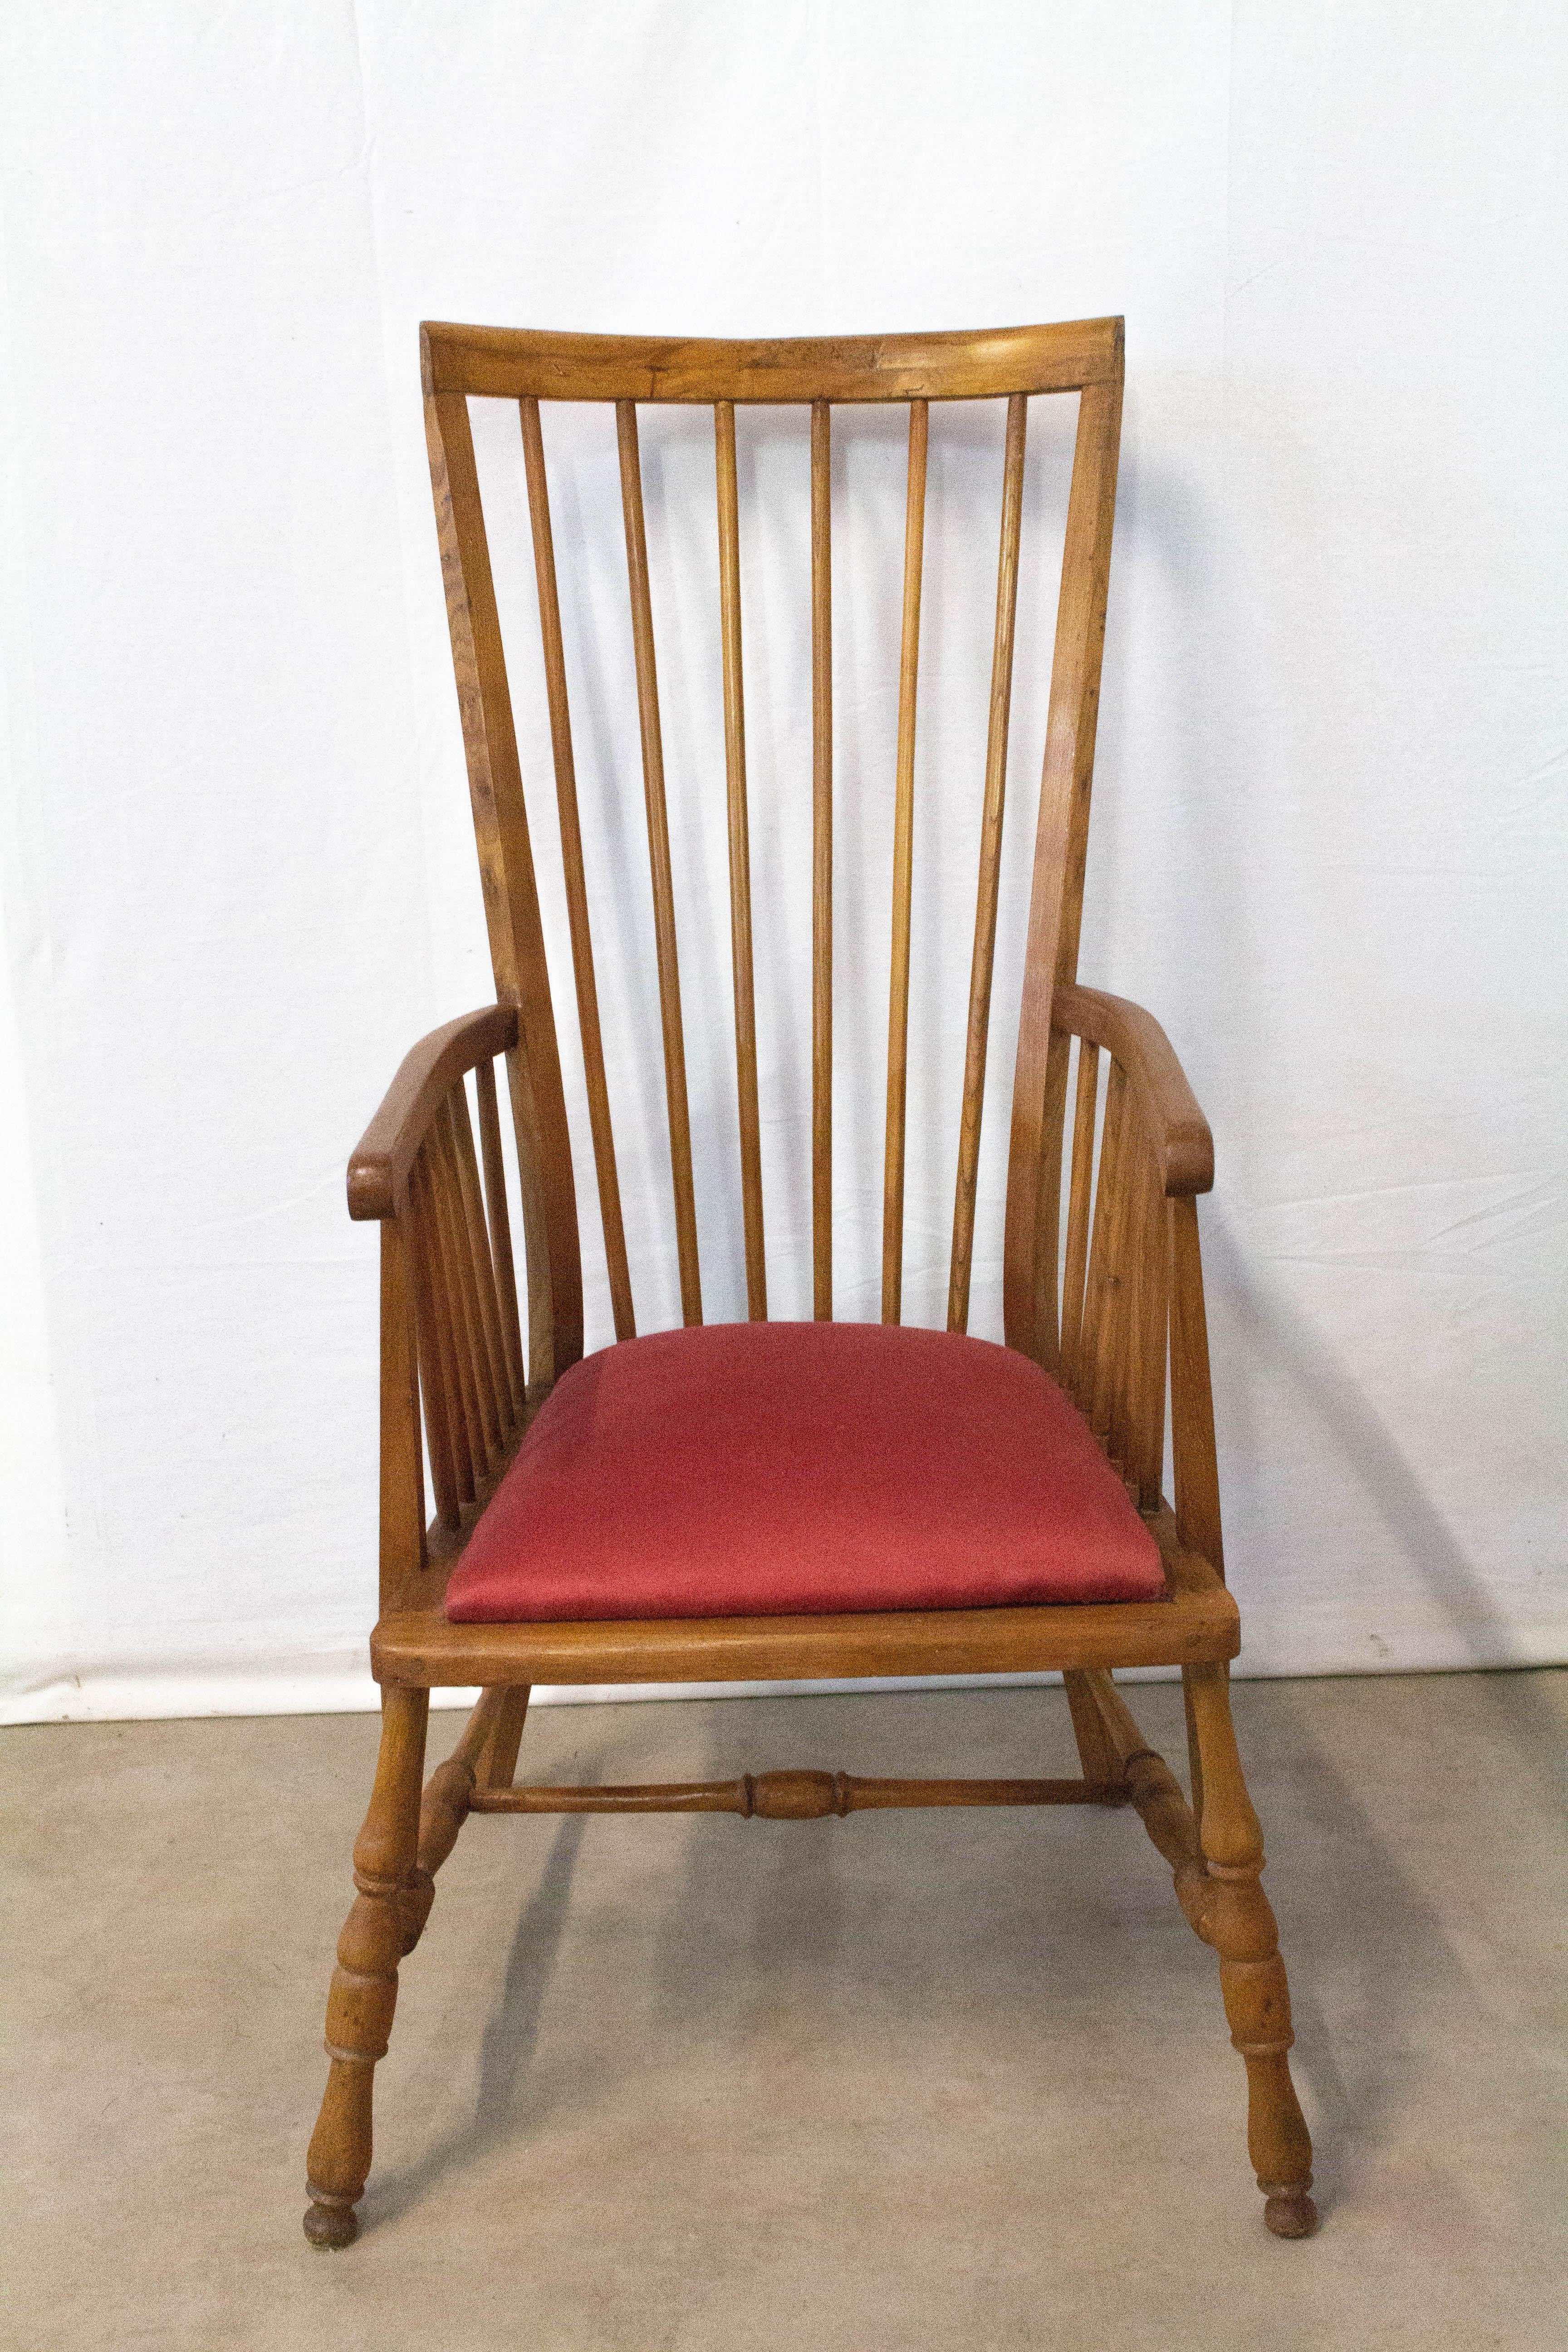 Windsor elm chair, midcentury armchair, circa 1950
Beautiful woodworking, please see photos
Originally the seat was caned, it has been replaced by this elegant cushion.
Good condition.